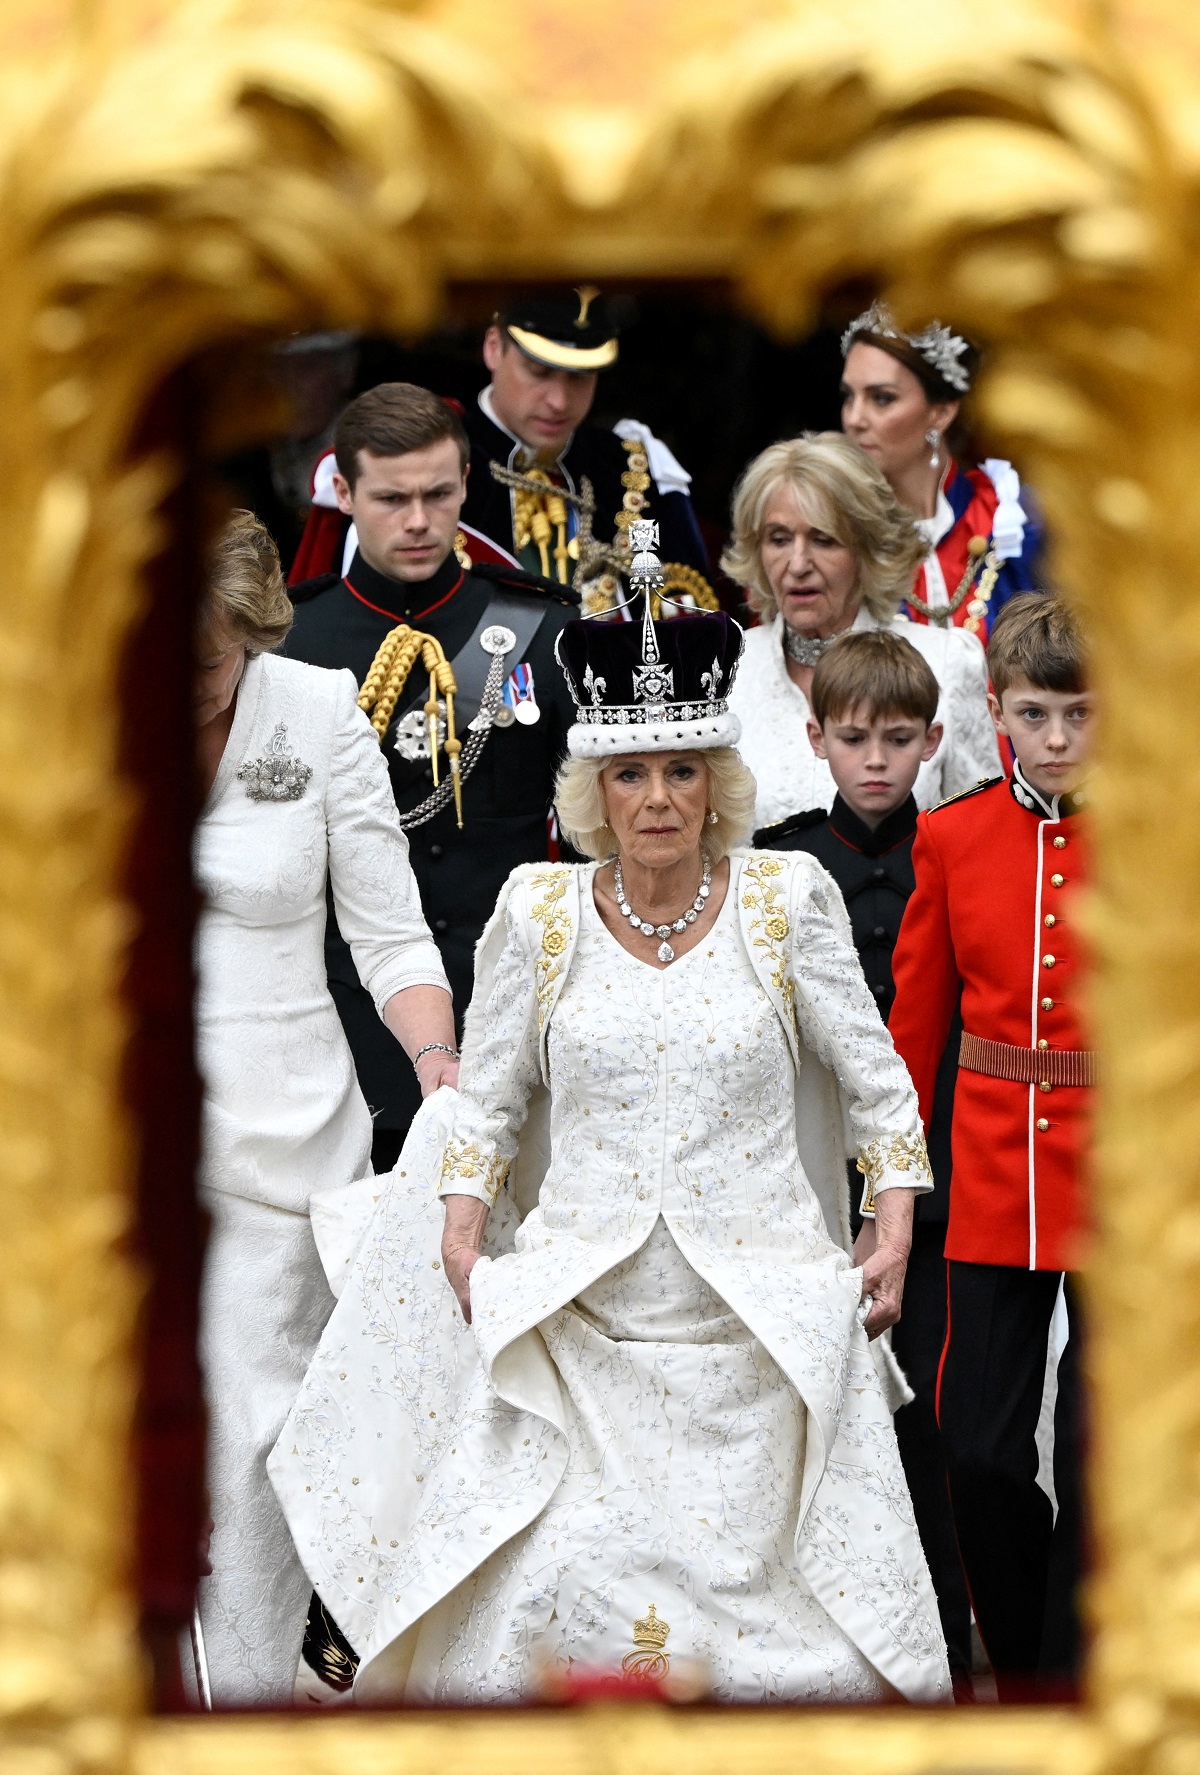 Camilla Parker Bowles (now-Queen Camilla) leaving her coronation ceremony at Westminster Abbey followed by Prince William, Kate Middleton, and others